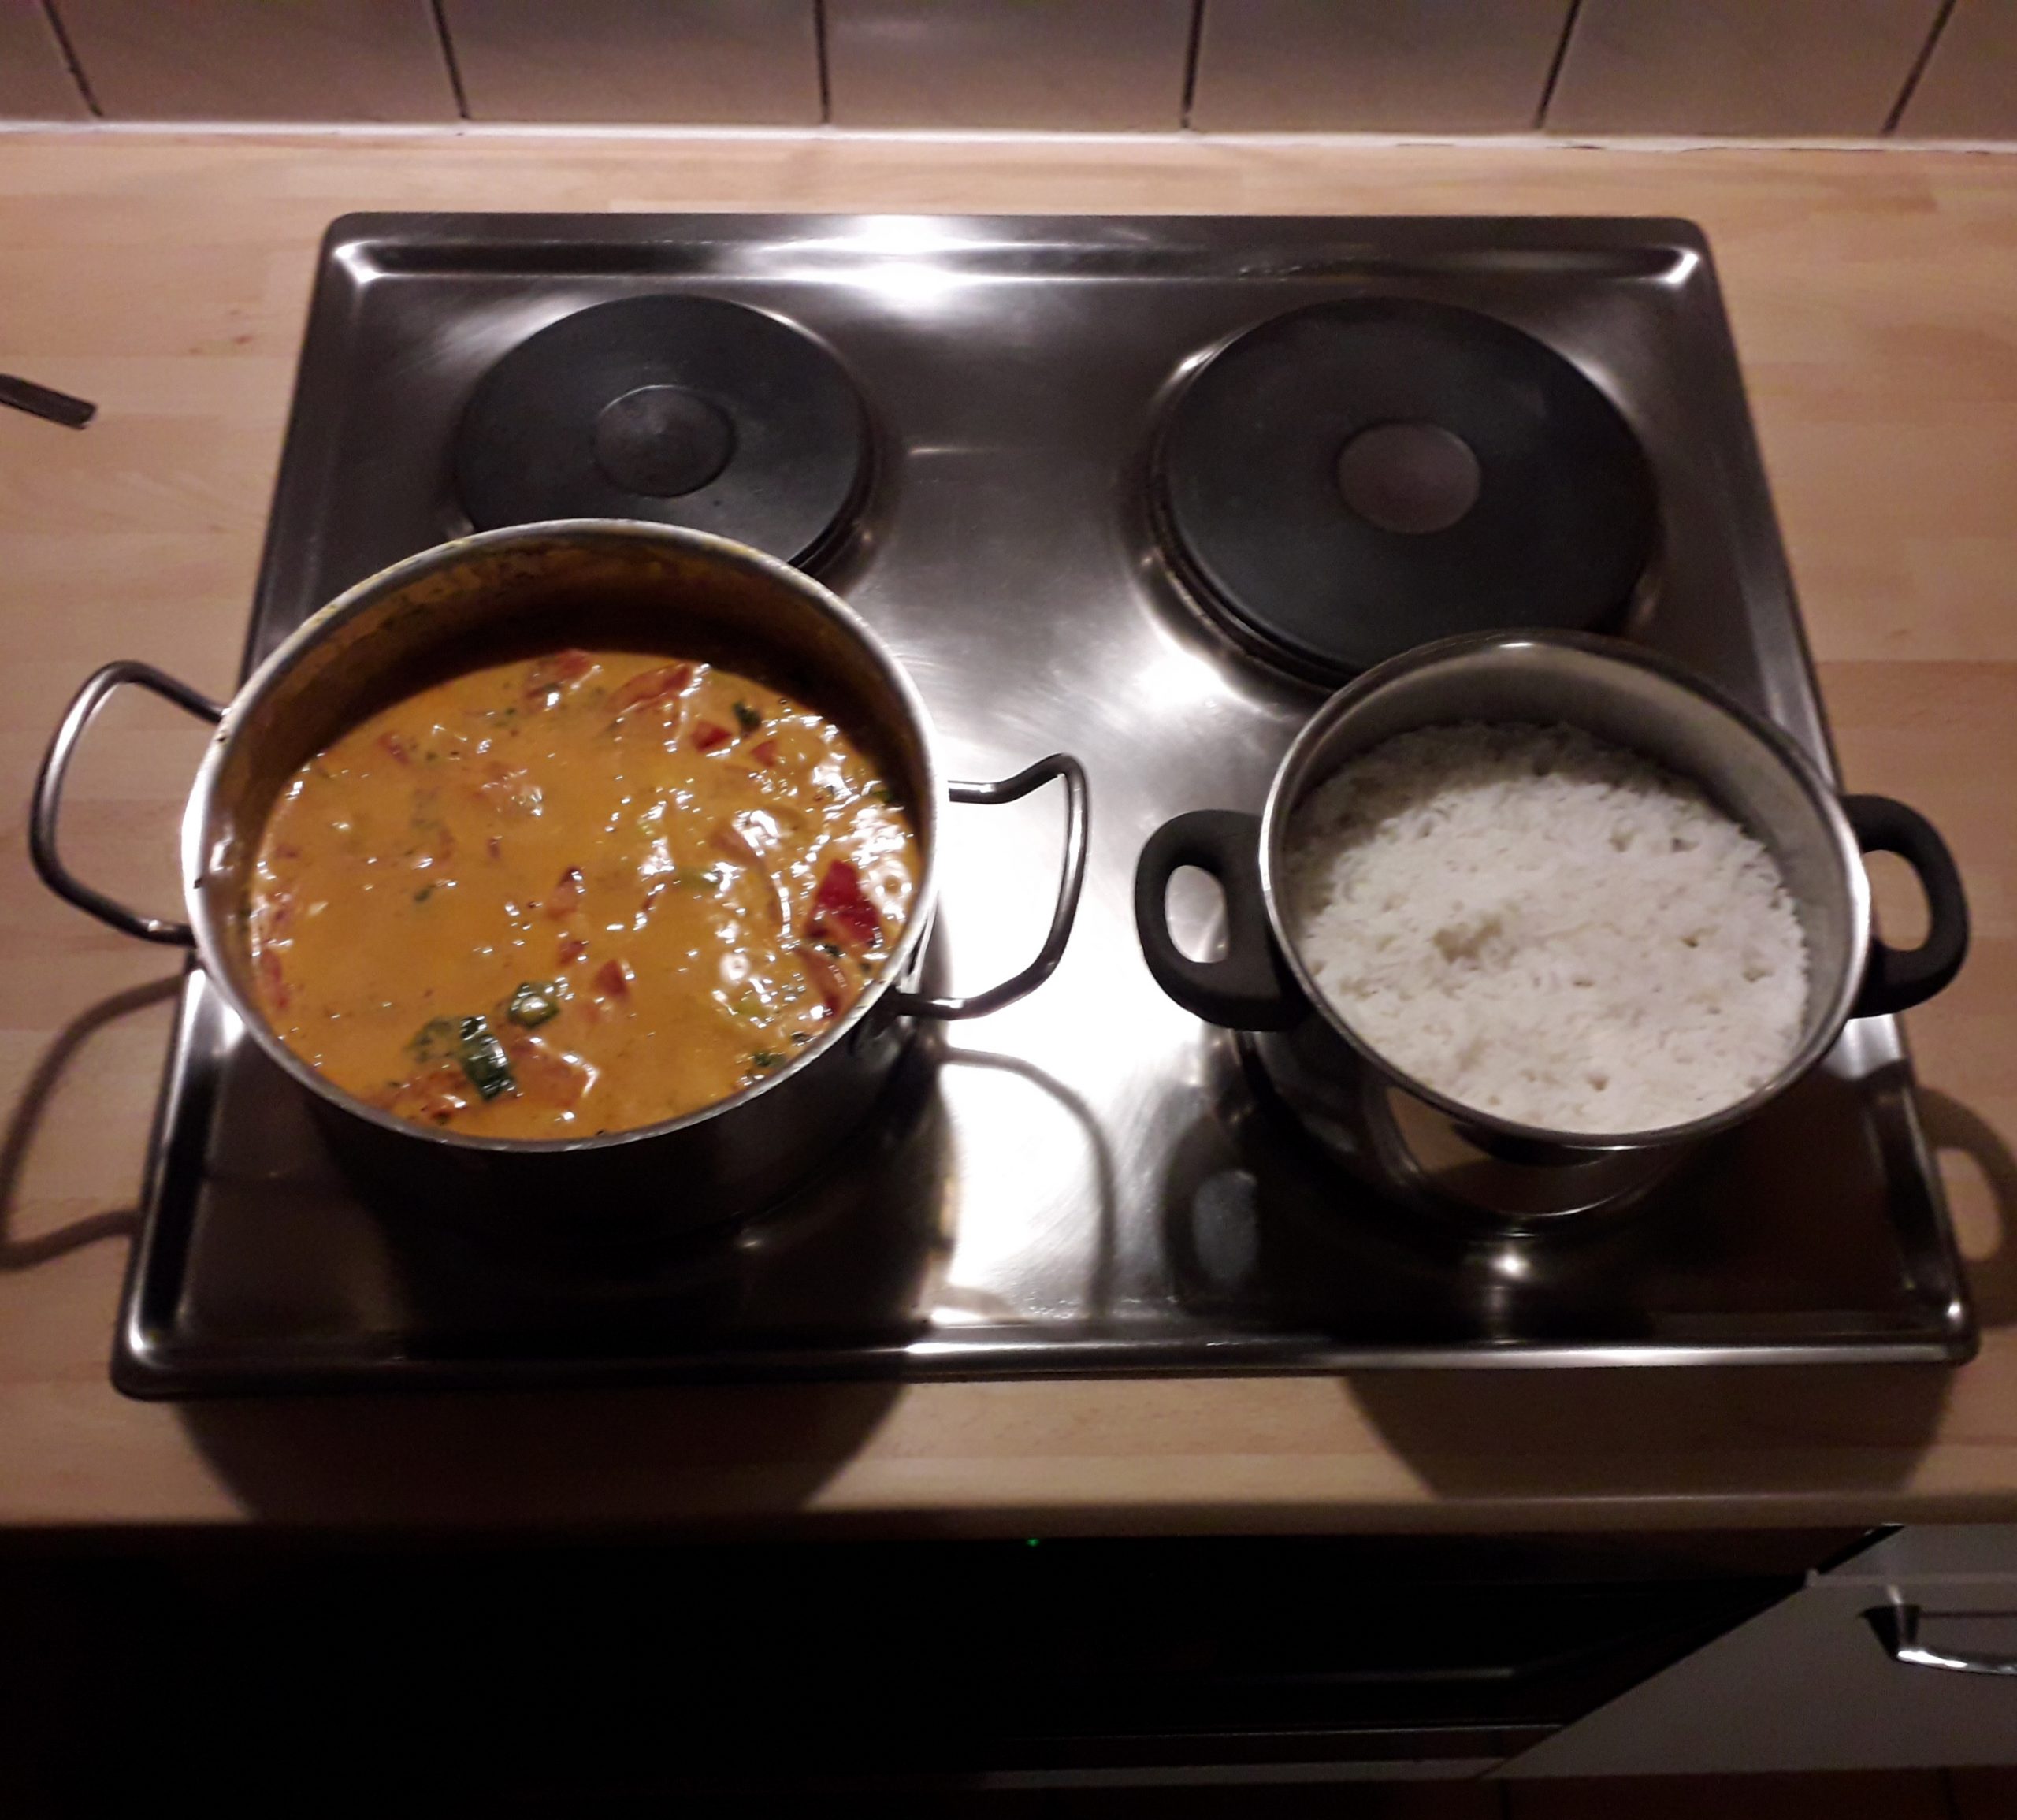 RECIPES FOR DEVOURING BANDS #3: CURRY AGAINST CORONA